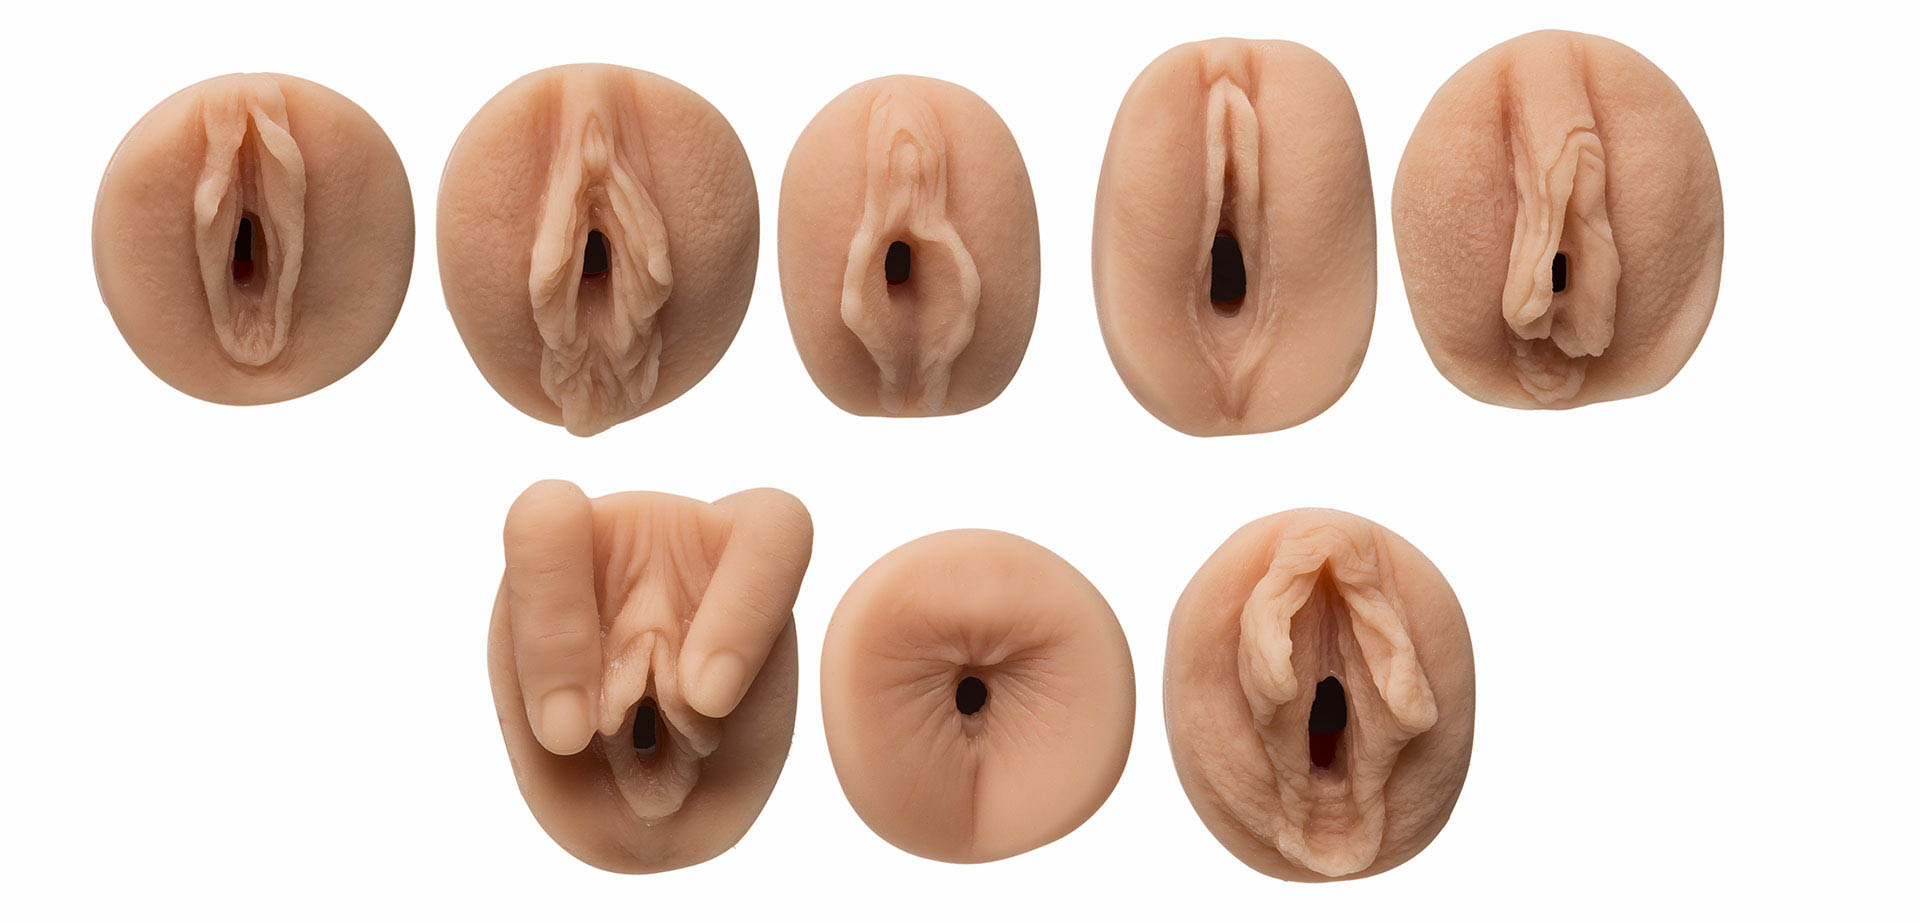 Types of realistic Vaginas.